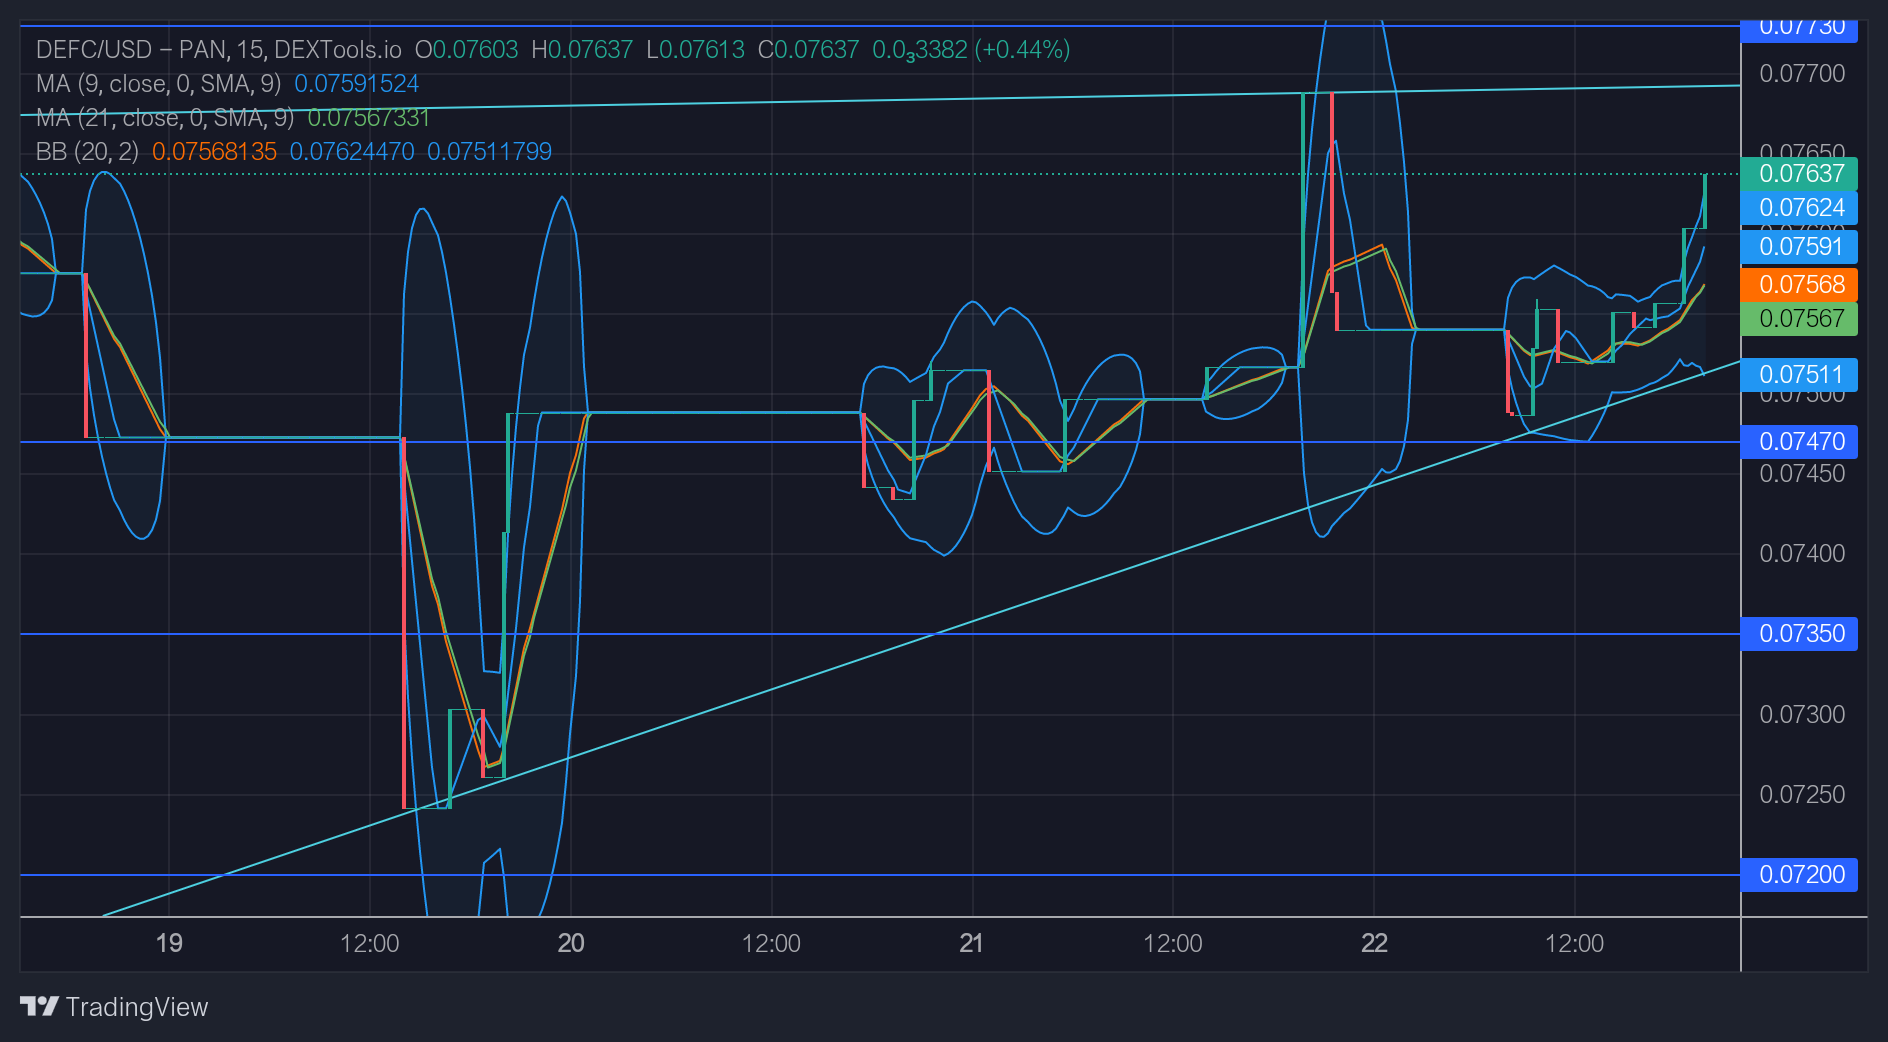 DeFI Coin Price Forecast: DeFC Price is expected to hit the restriction zone at $0.07730 soon